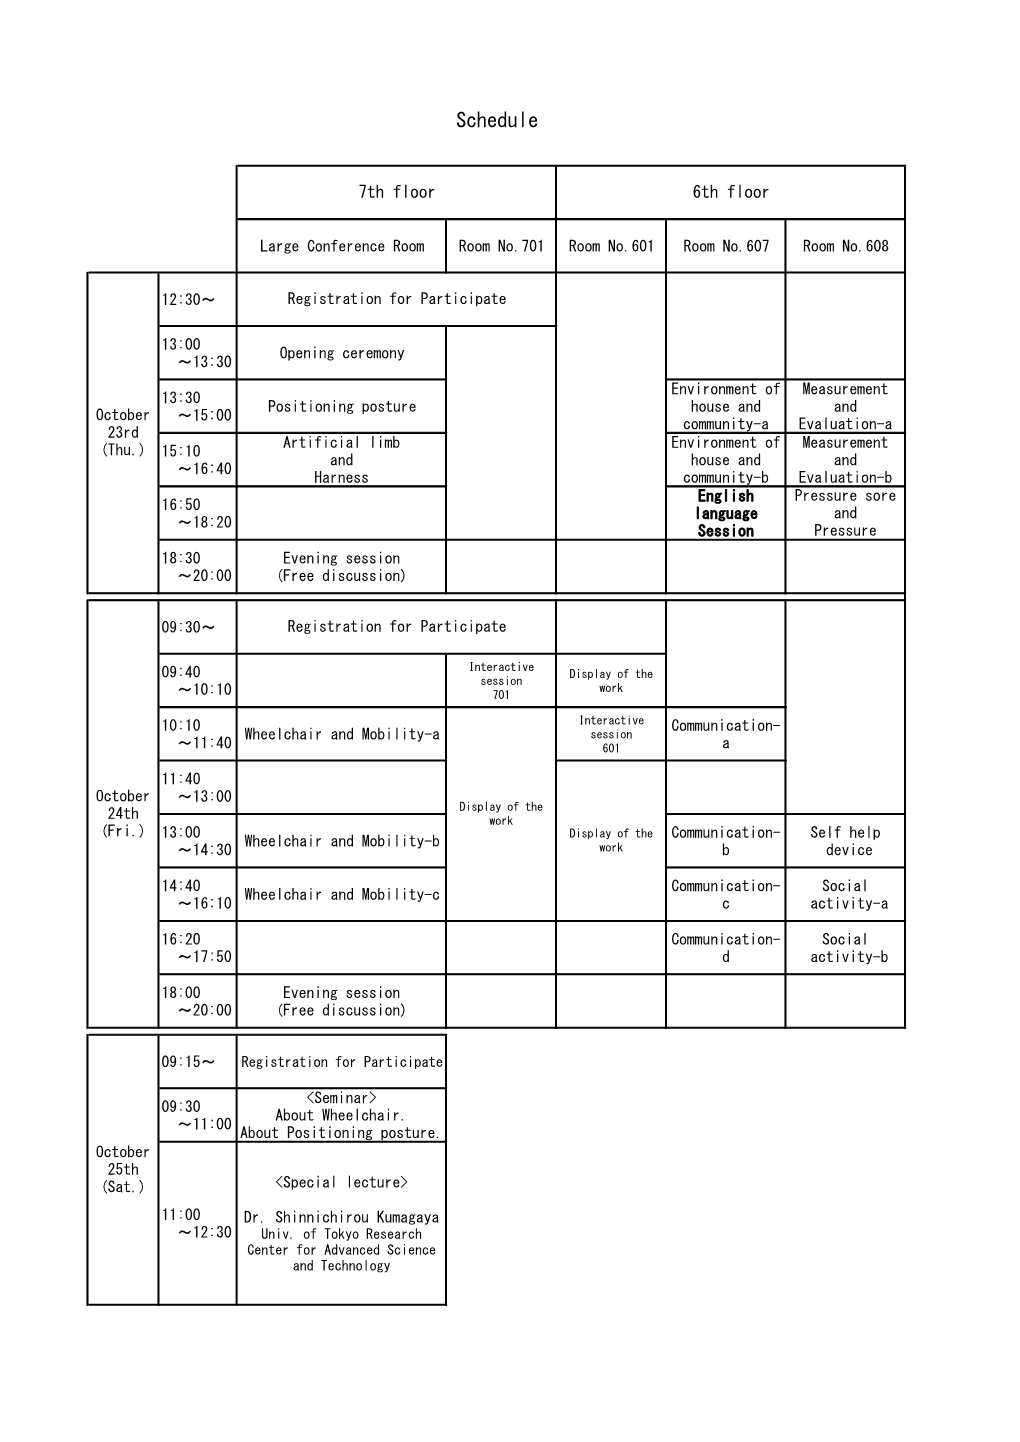 The Details of Schedule and Program(PDF)